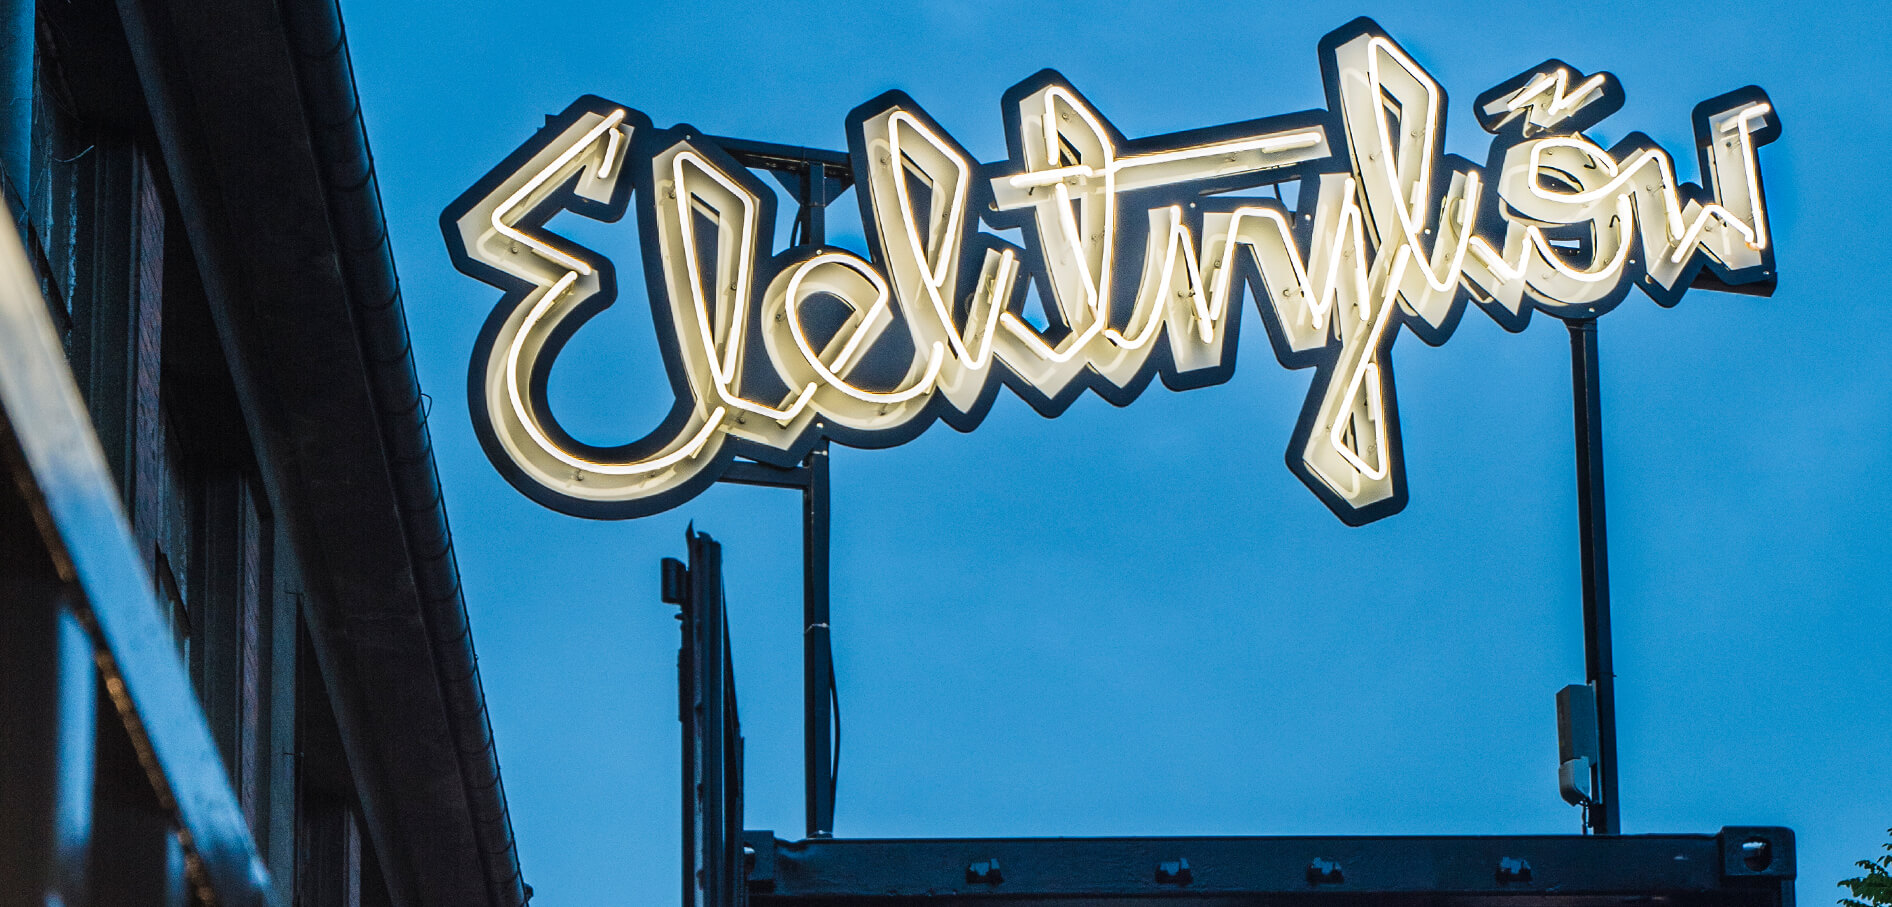 Impianto elettrico - neon-electricity-street-neon-on-a-steel-at-height-neon-sub-lighted-neon-on-a-container-neon-above-glow-neon-in-a-pub-letter-neonowe-logo-sign-gdansk